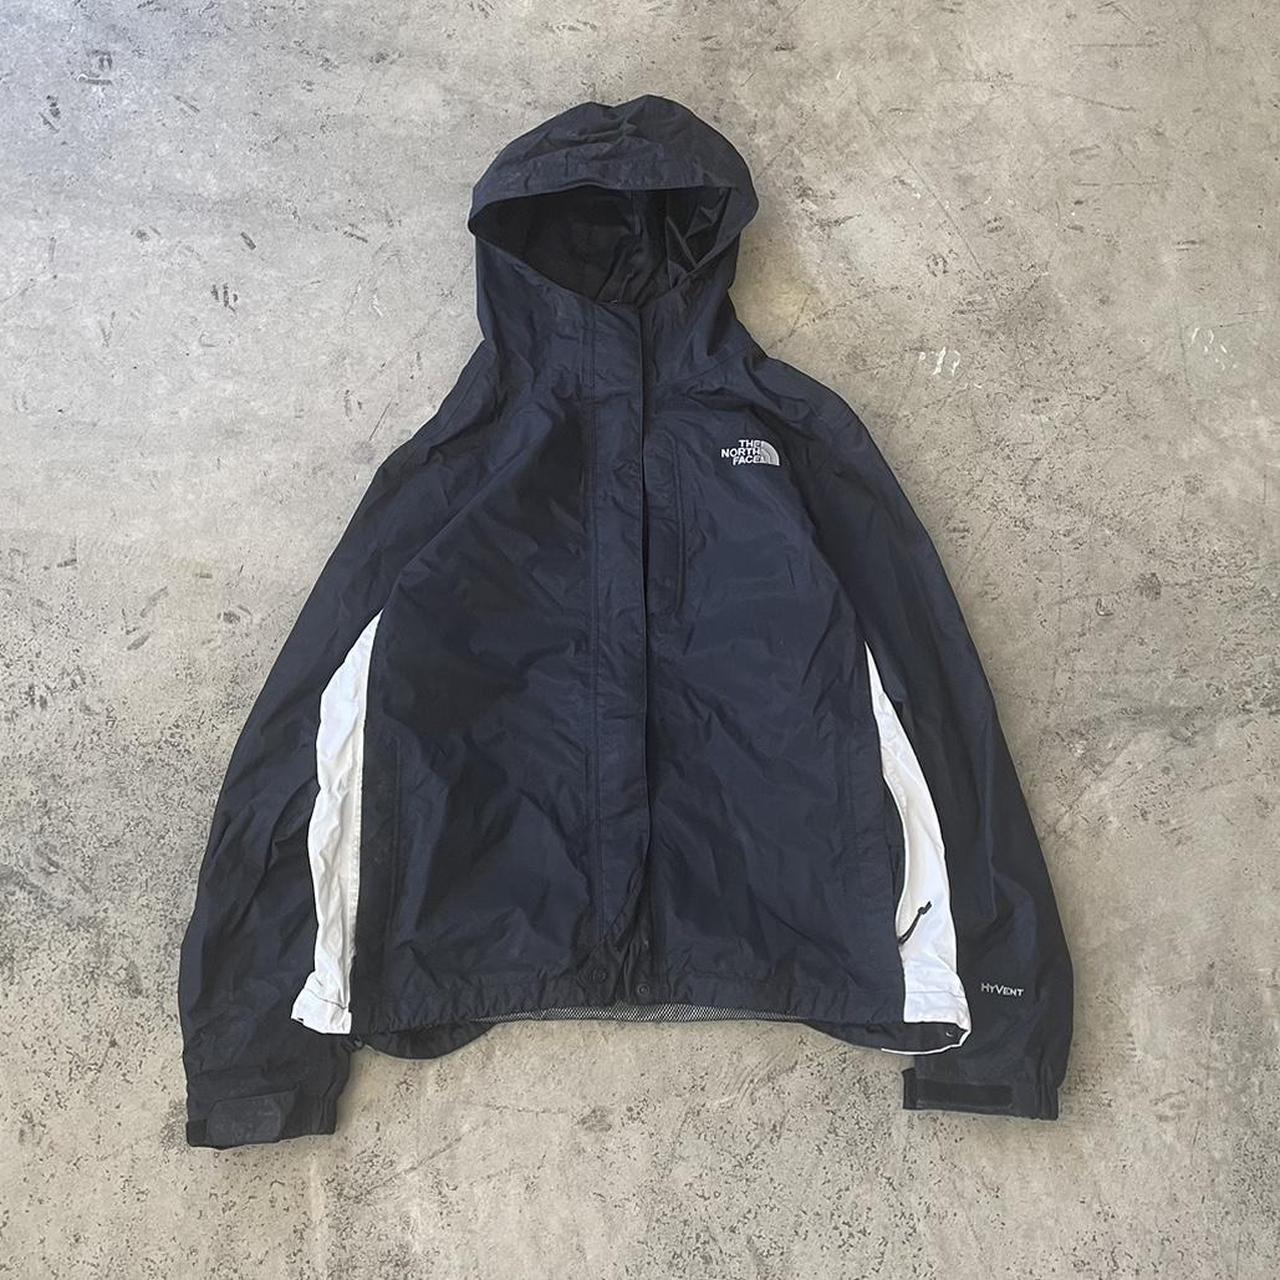 The North Face Women's Black and White Jacket | Depop